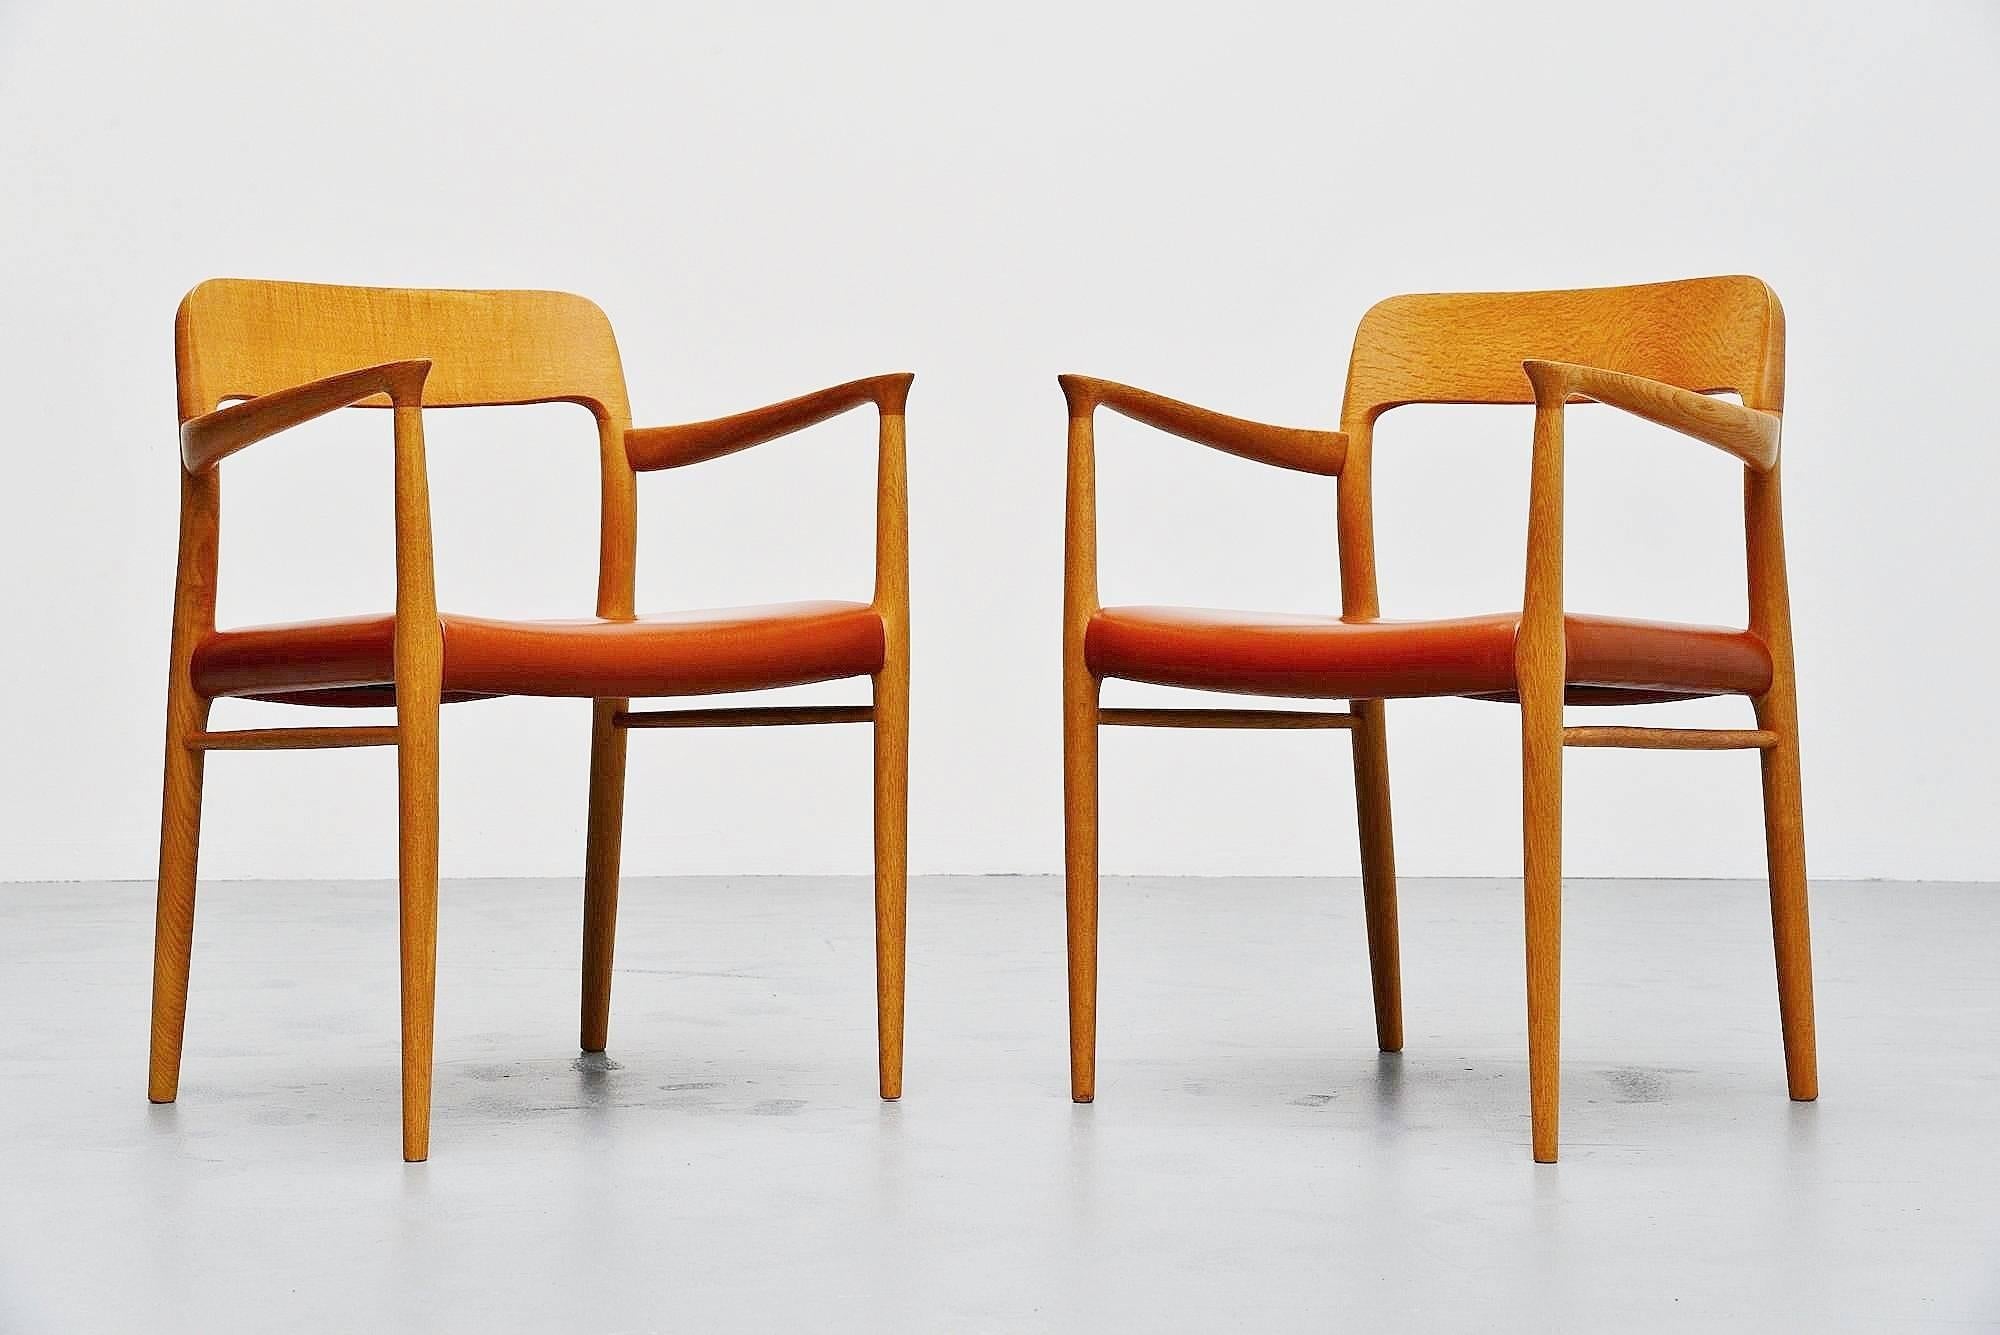 Very nice pair of arm chairs designed by Niels Otto Moller, manufactured by J.L. Møller Mobelfabrik, Denmark 1954. These chairs are made of solid oakwood and have very nice cognac leather upholstery. The chairs were hardly used by previous owner and